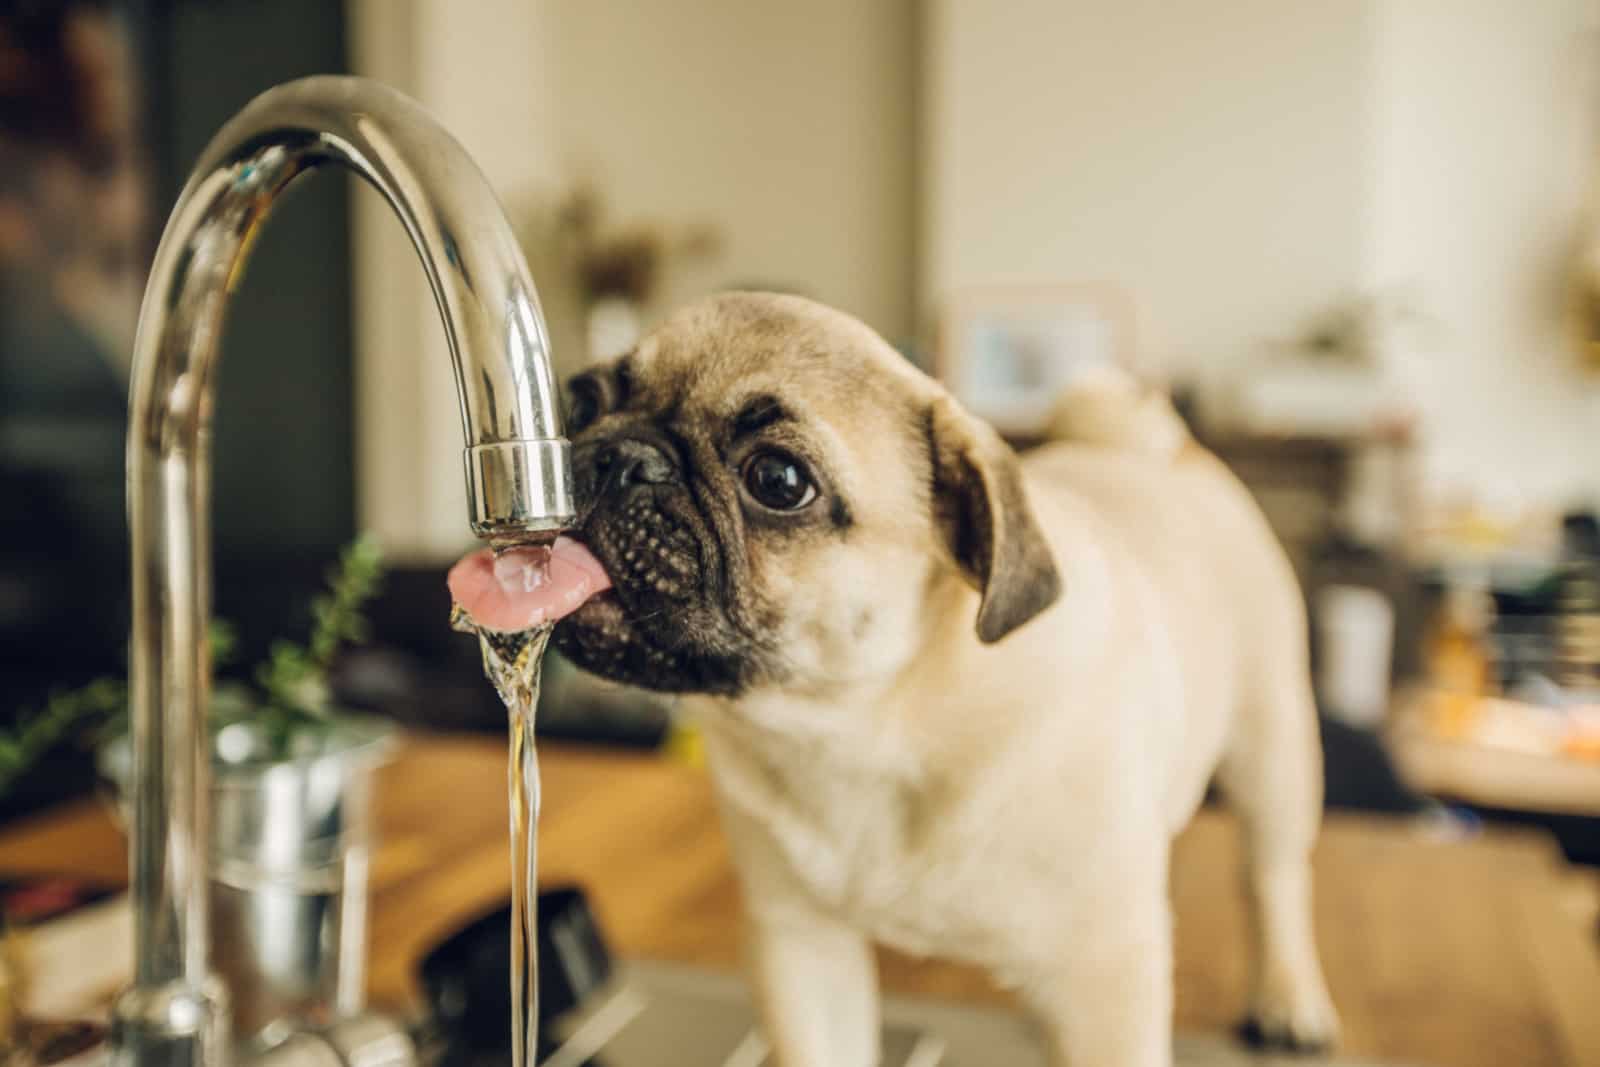 How To Get A Sick Dog To Drink Water? Help Is On The Way